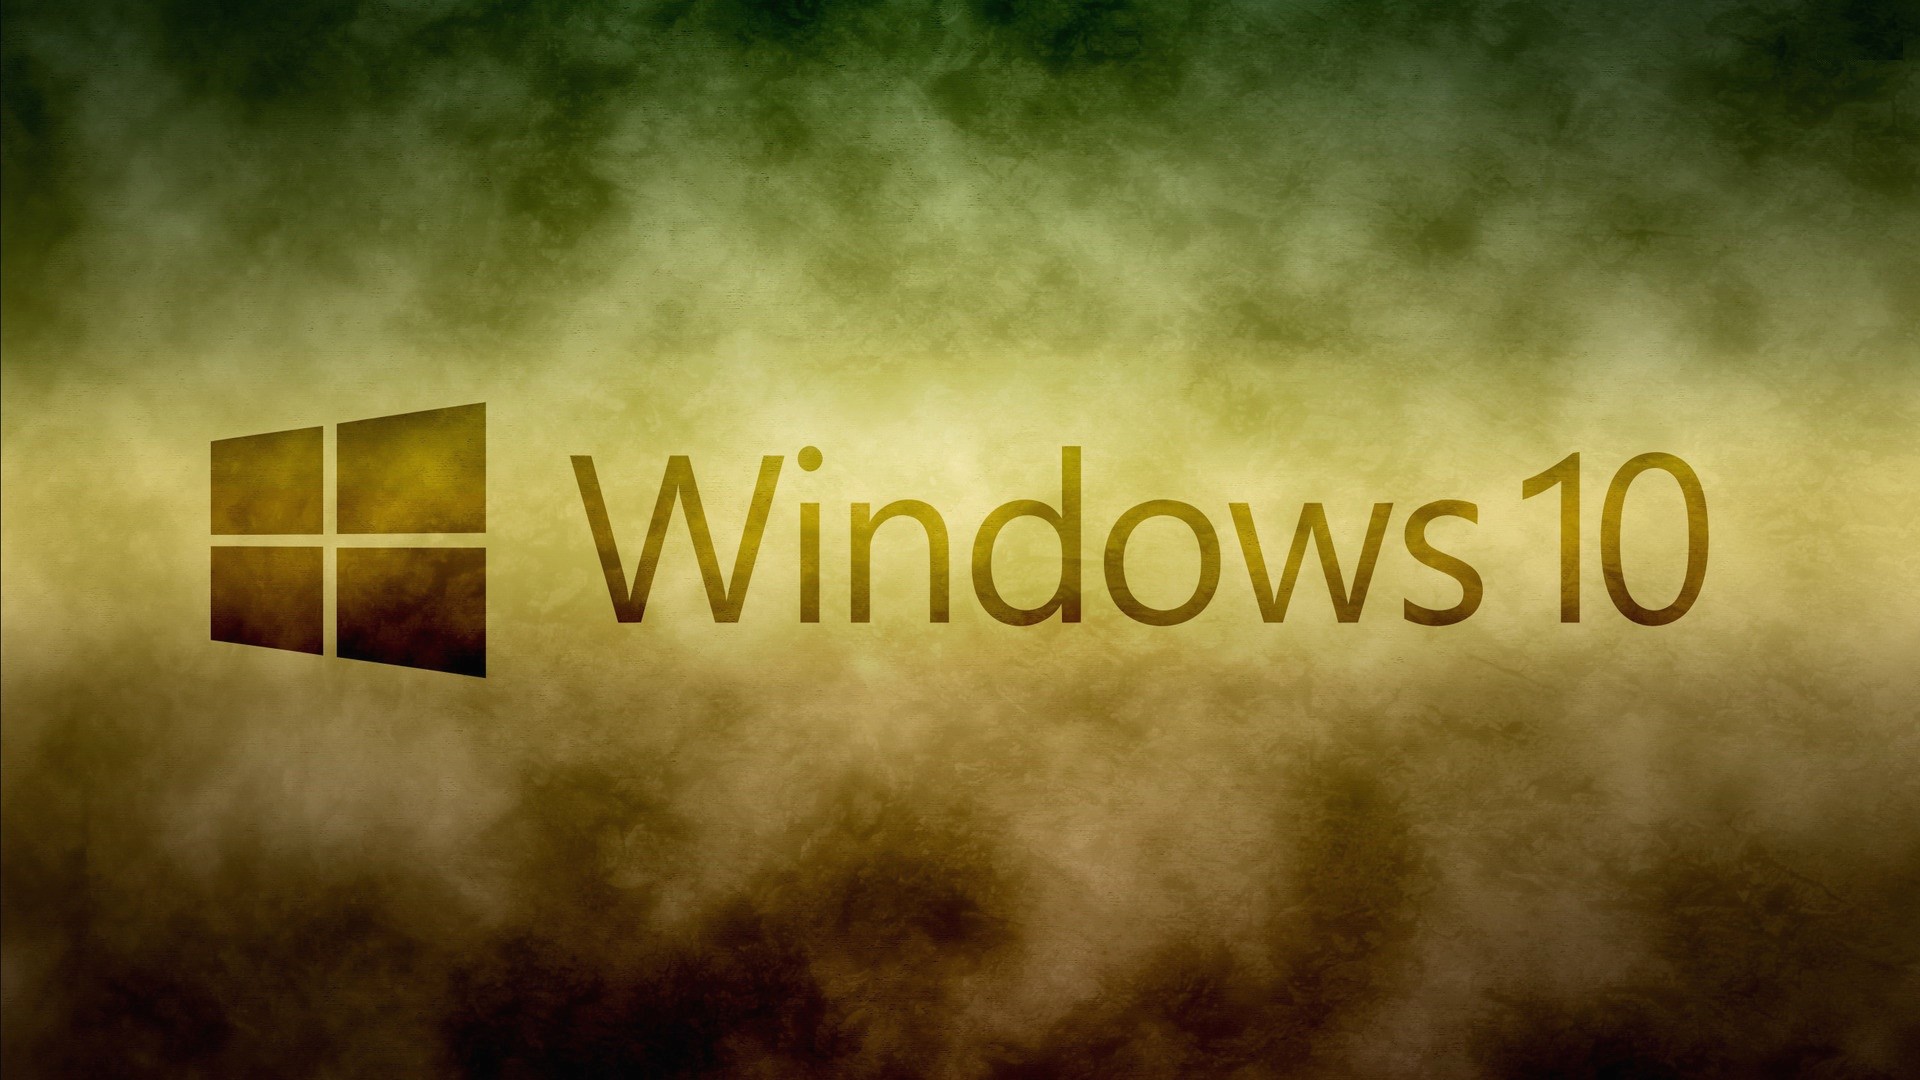 Free download Stunning Windows Wallpapers Hd Image Collection Laptop